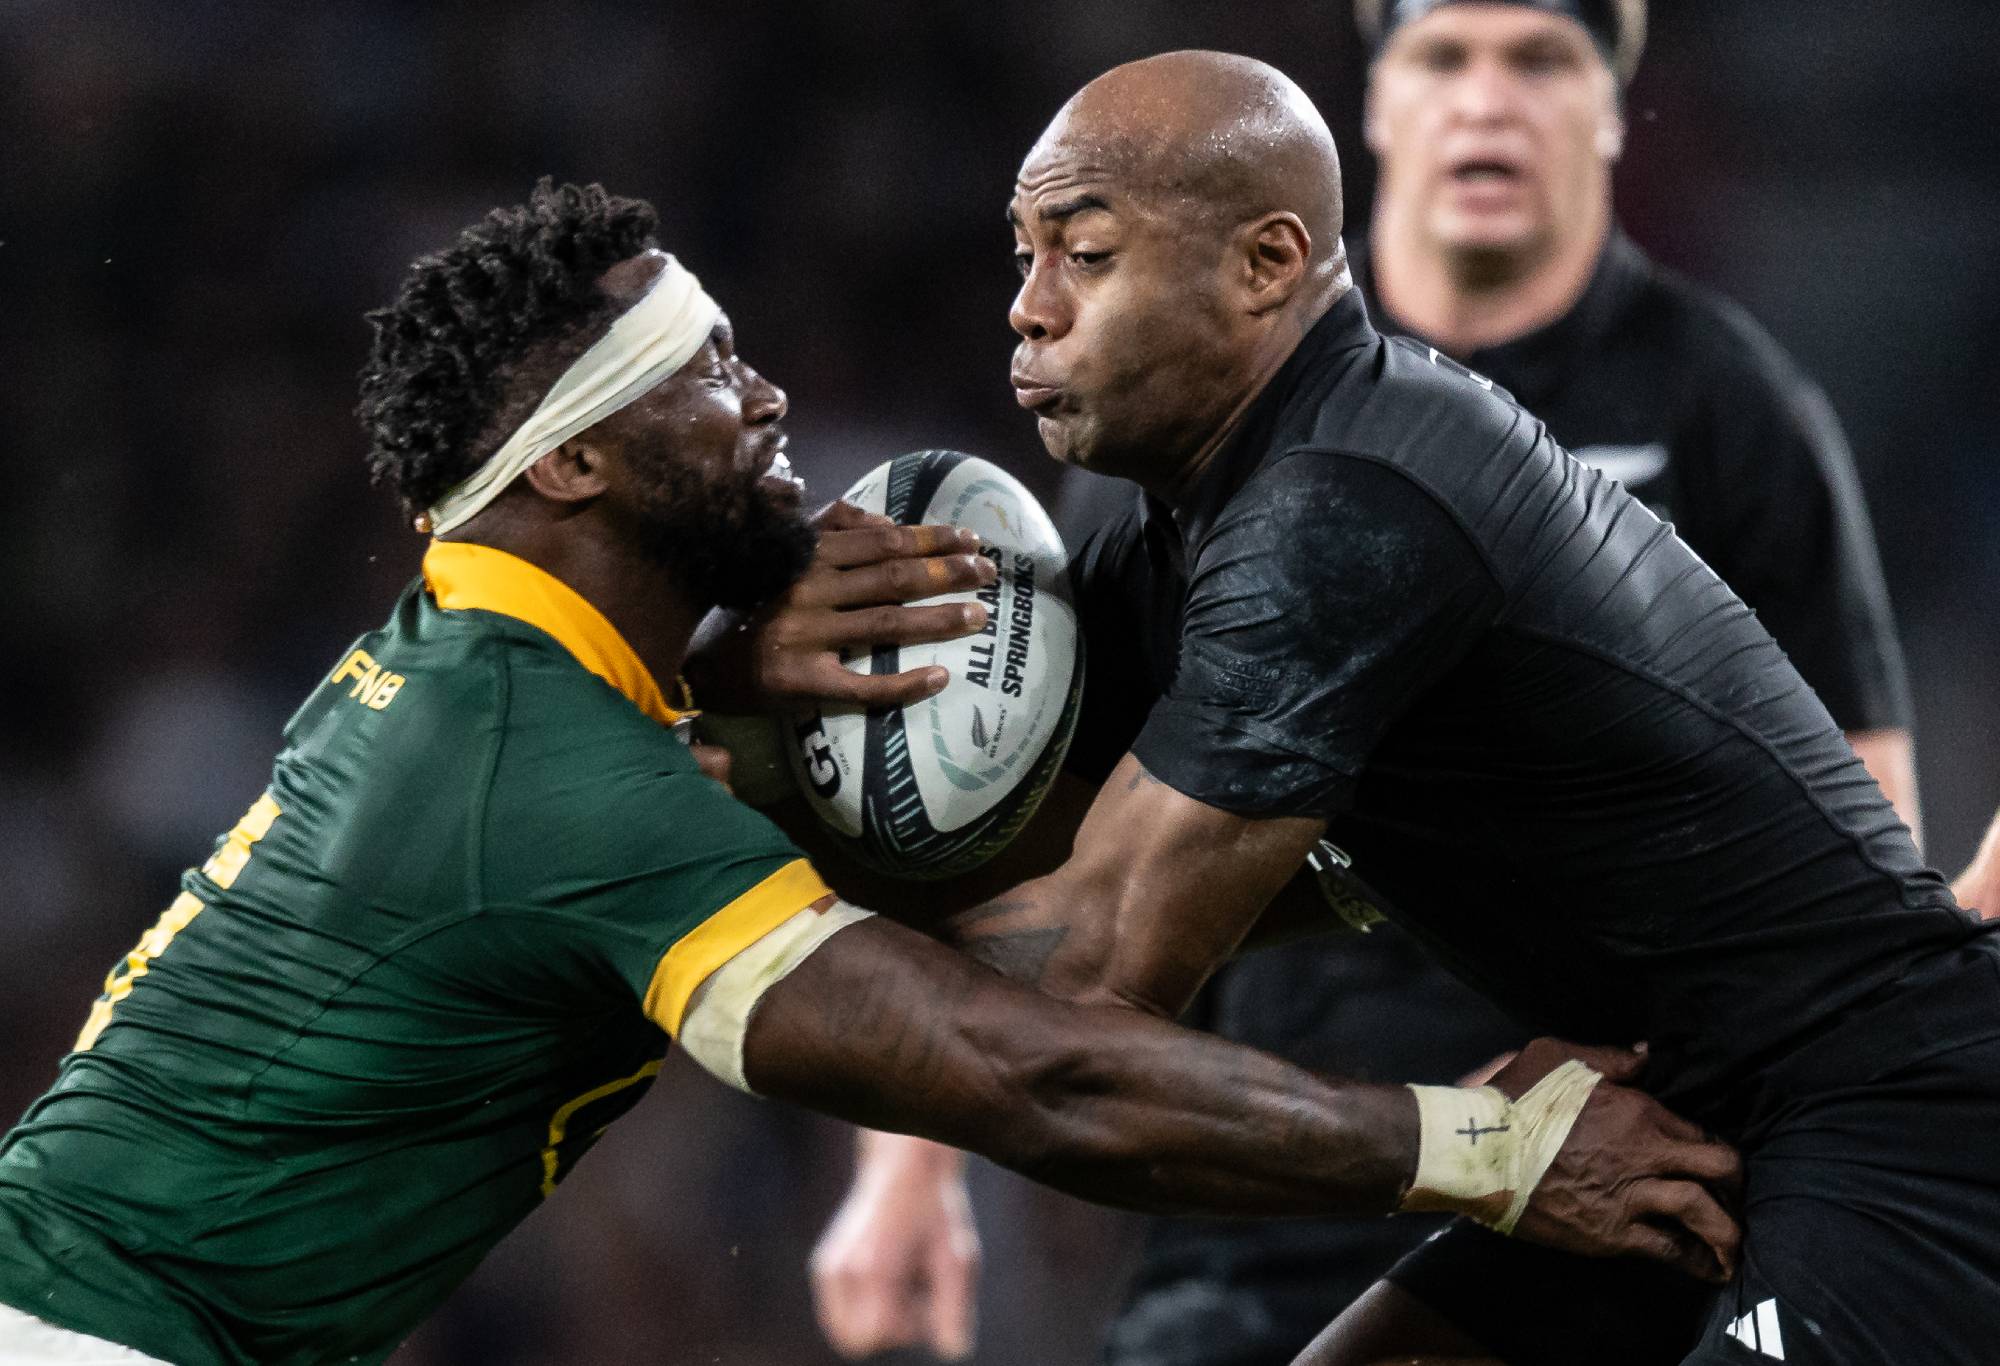 Siya Kolisi of South Africa competing with Mark Telea of New Zealand (right) during the Summer International match between New Zealand All Blacks v South Africa at Twickenham Stadium on August 25, 2023 in London, England. (Photo by Andrew Kearns - CameraSport via Getty Images)